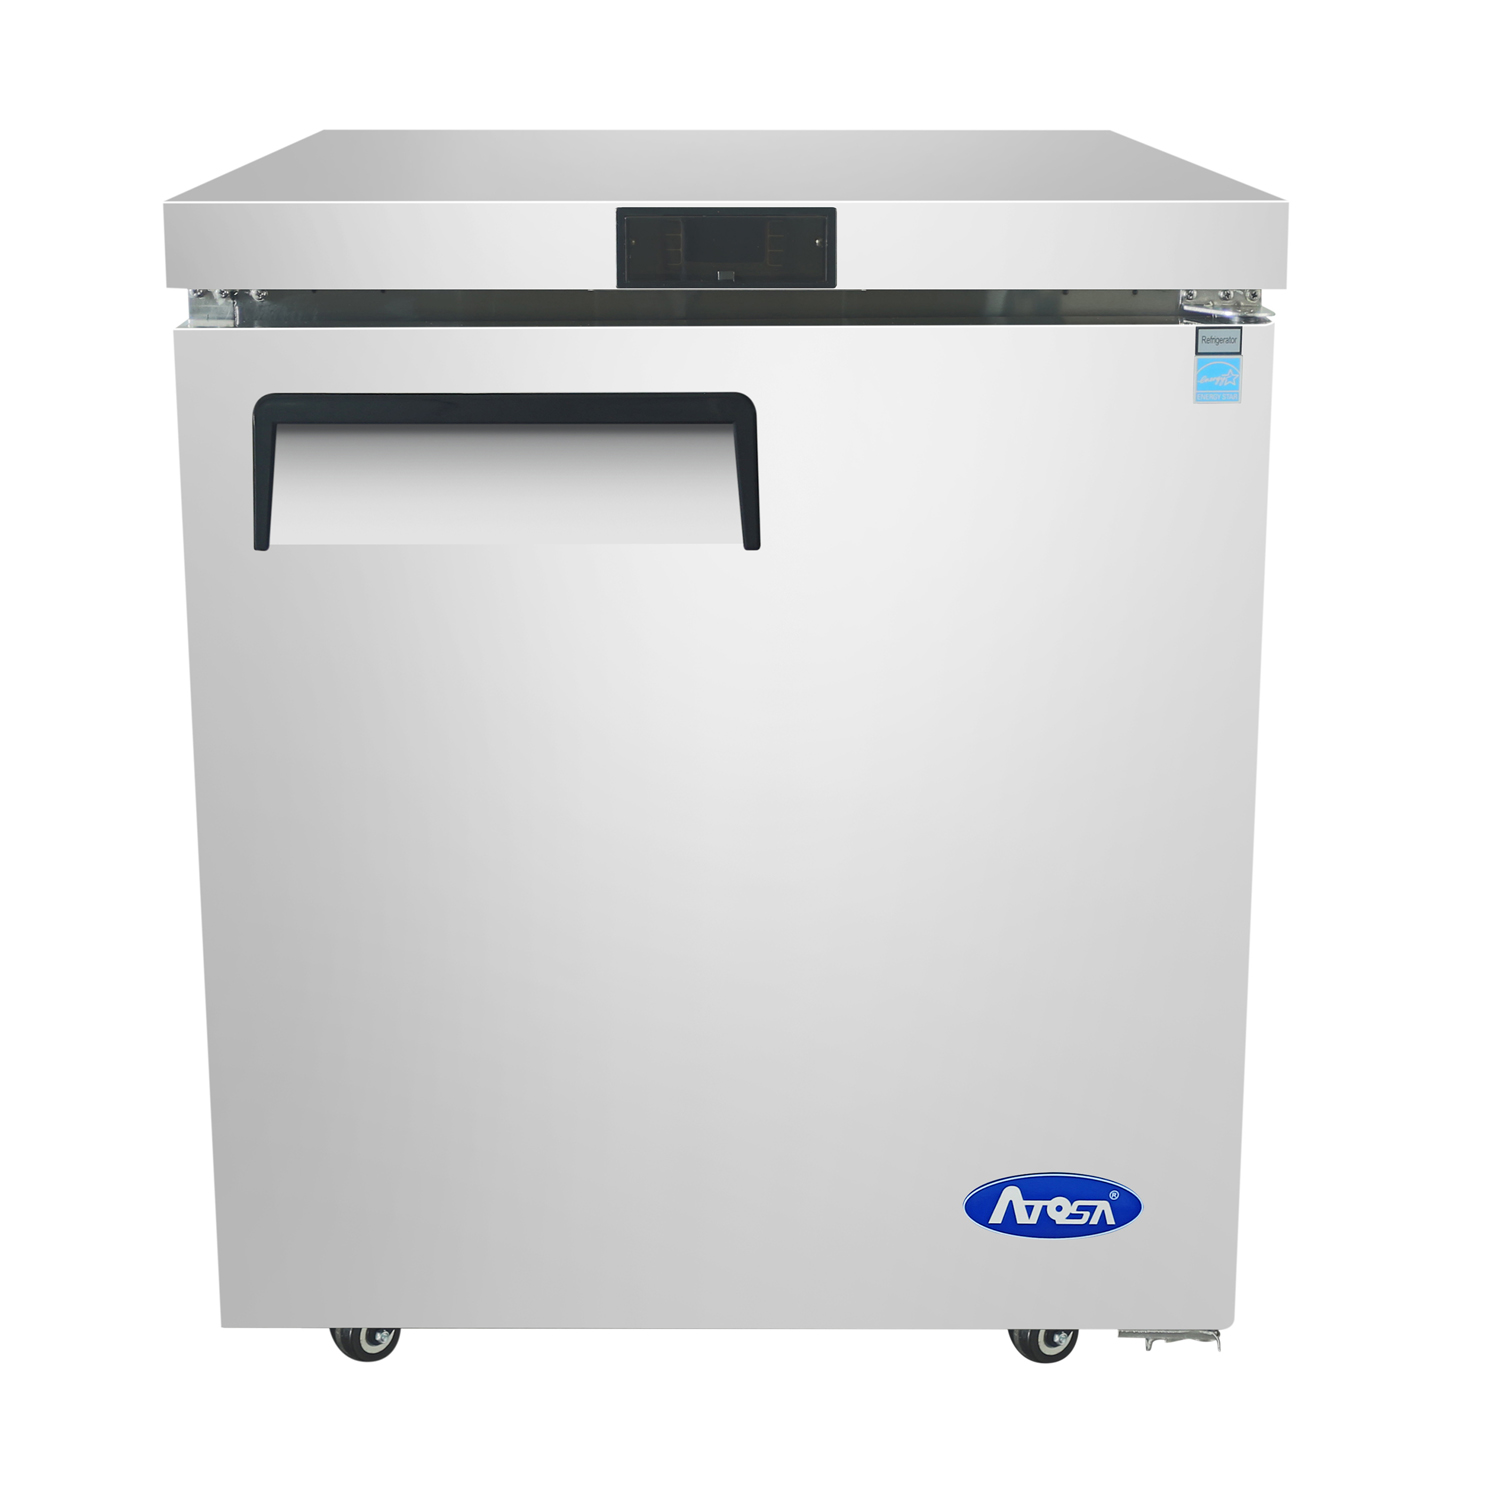 Atosa One Section Undercounter Freezer MGF8405GRL, 27-1/2"W, 7.15 cu. ft. - Left Hinge